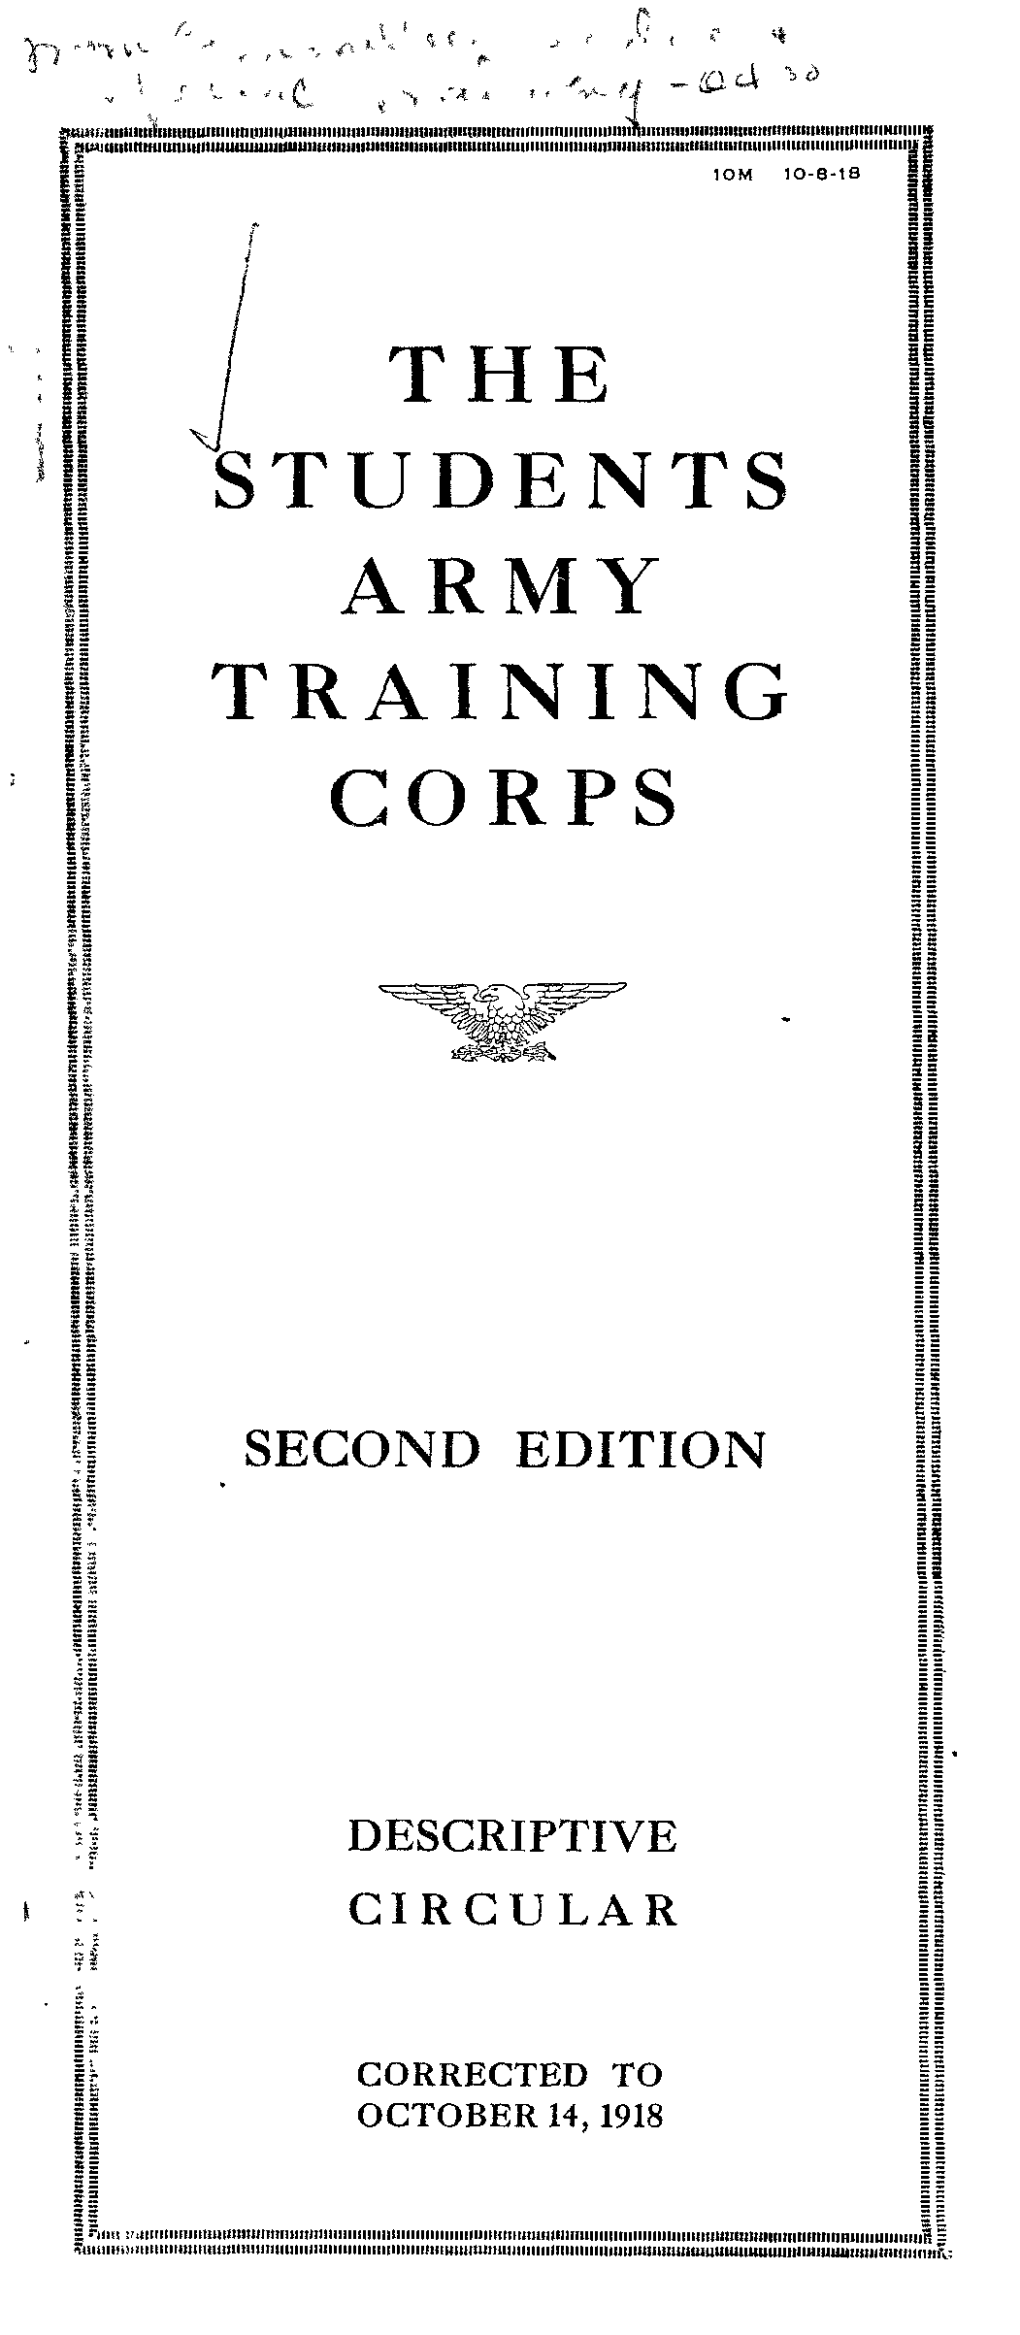 The Students Army Training Corps